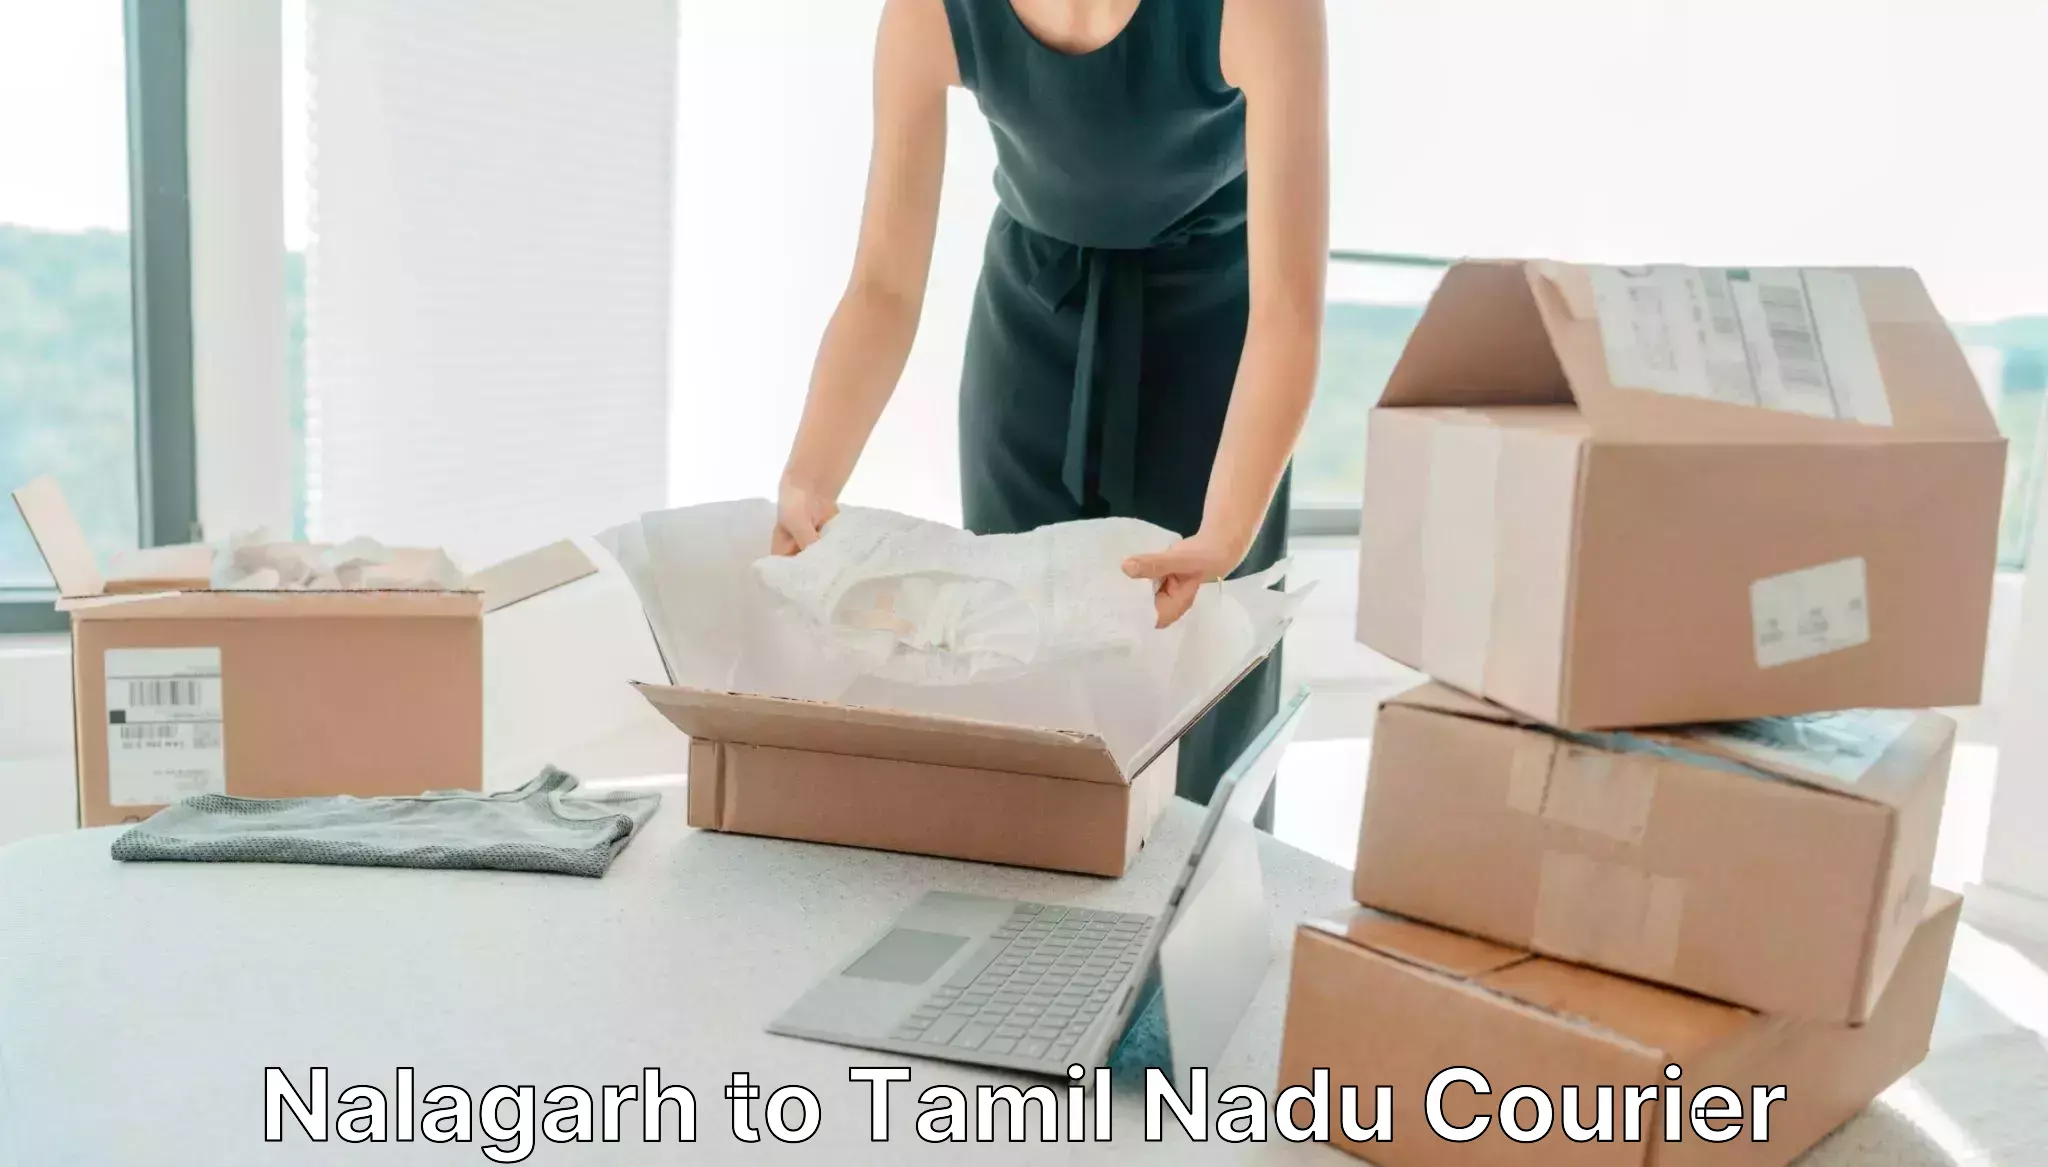 Customizable delivery plans Nalagarh to Chennai Port